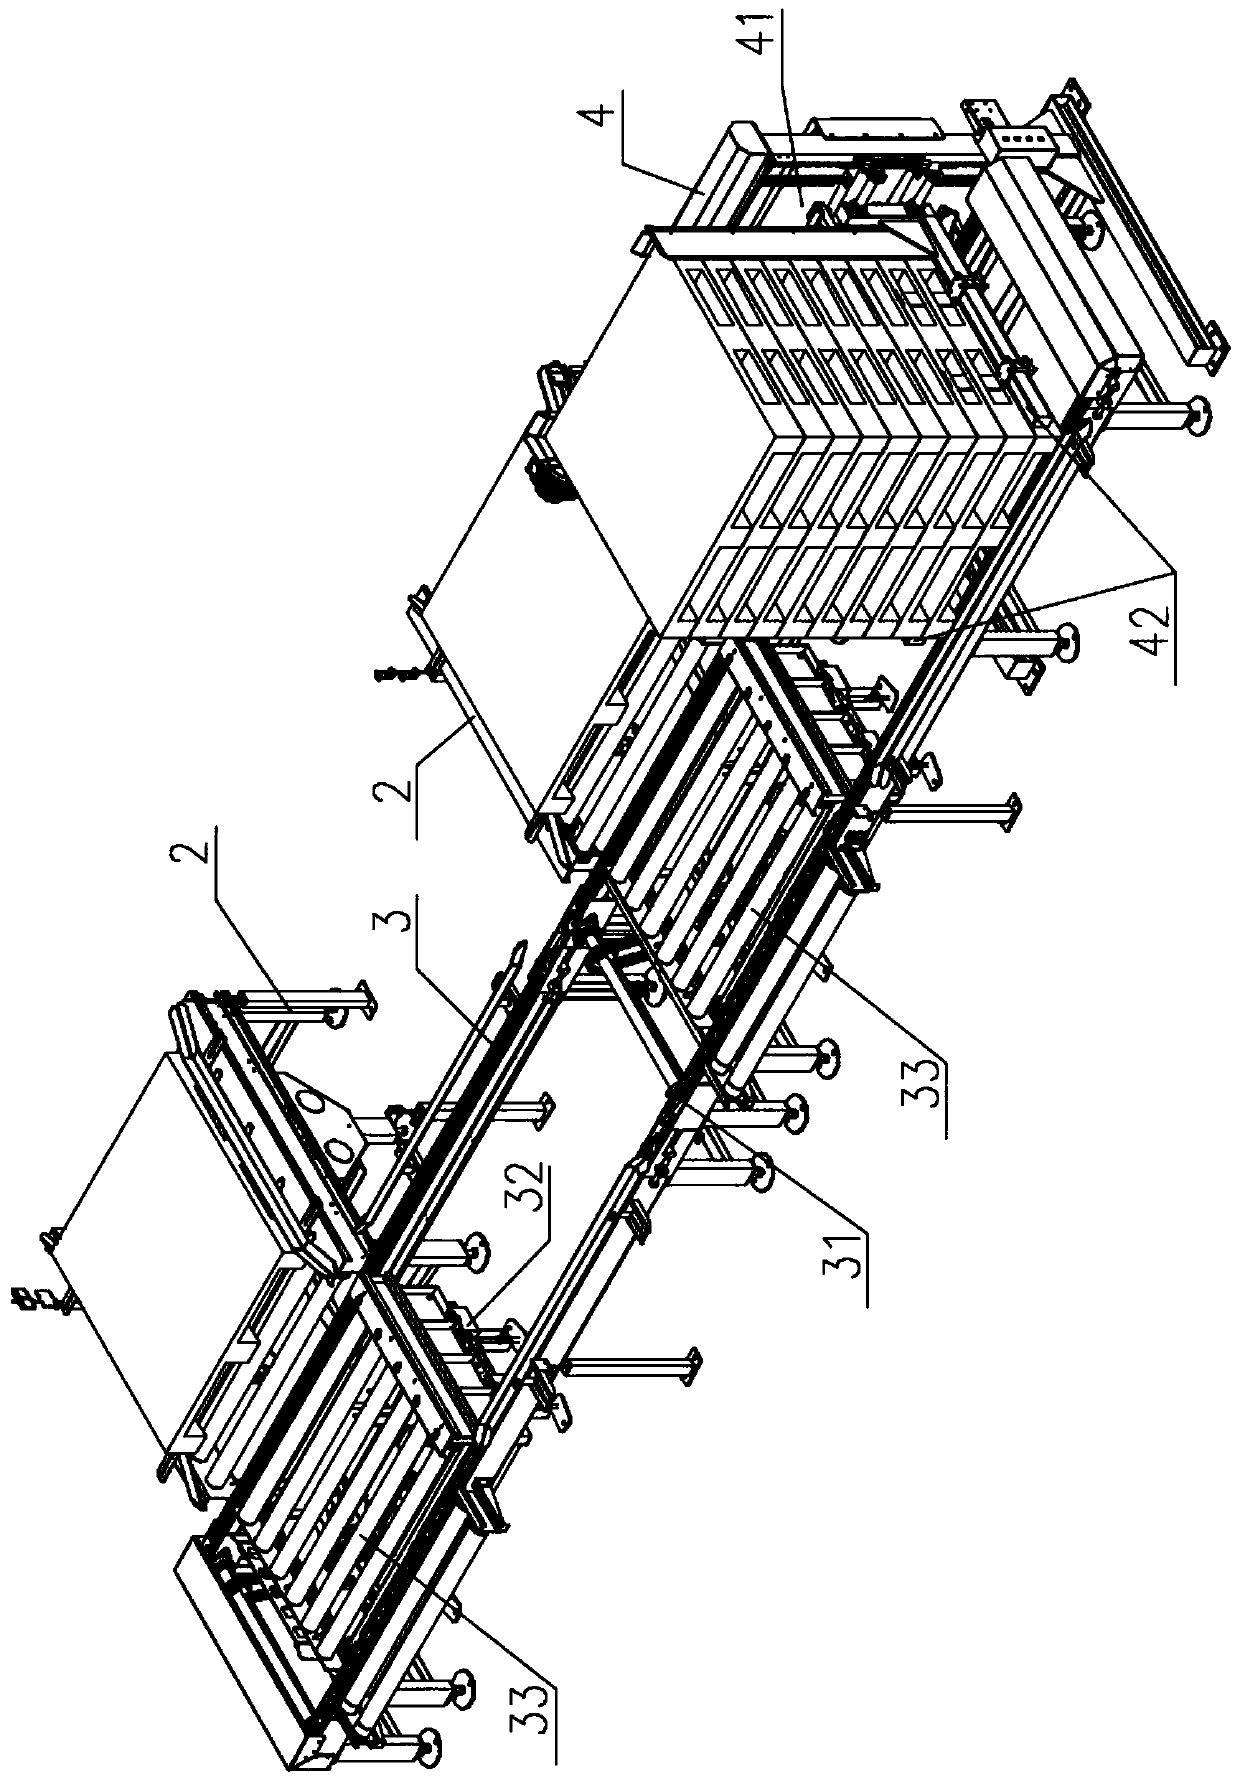 Automatic tray distribution and stacking system